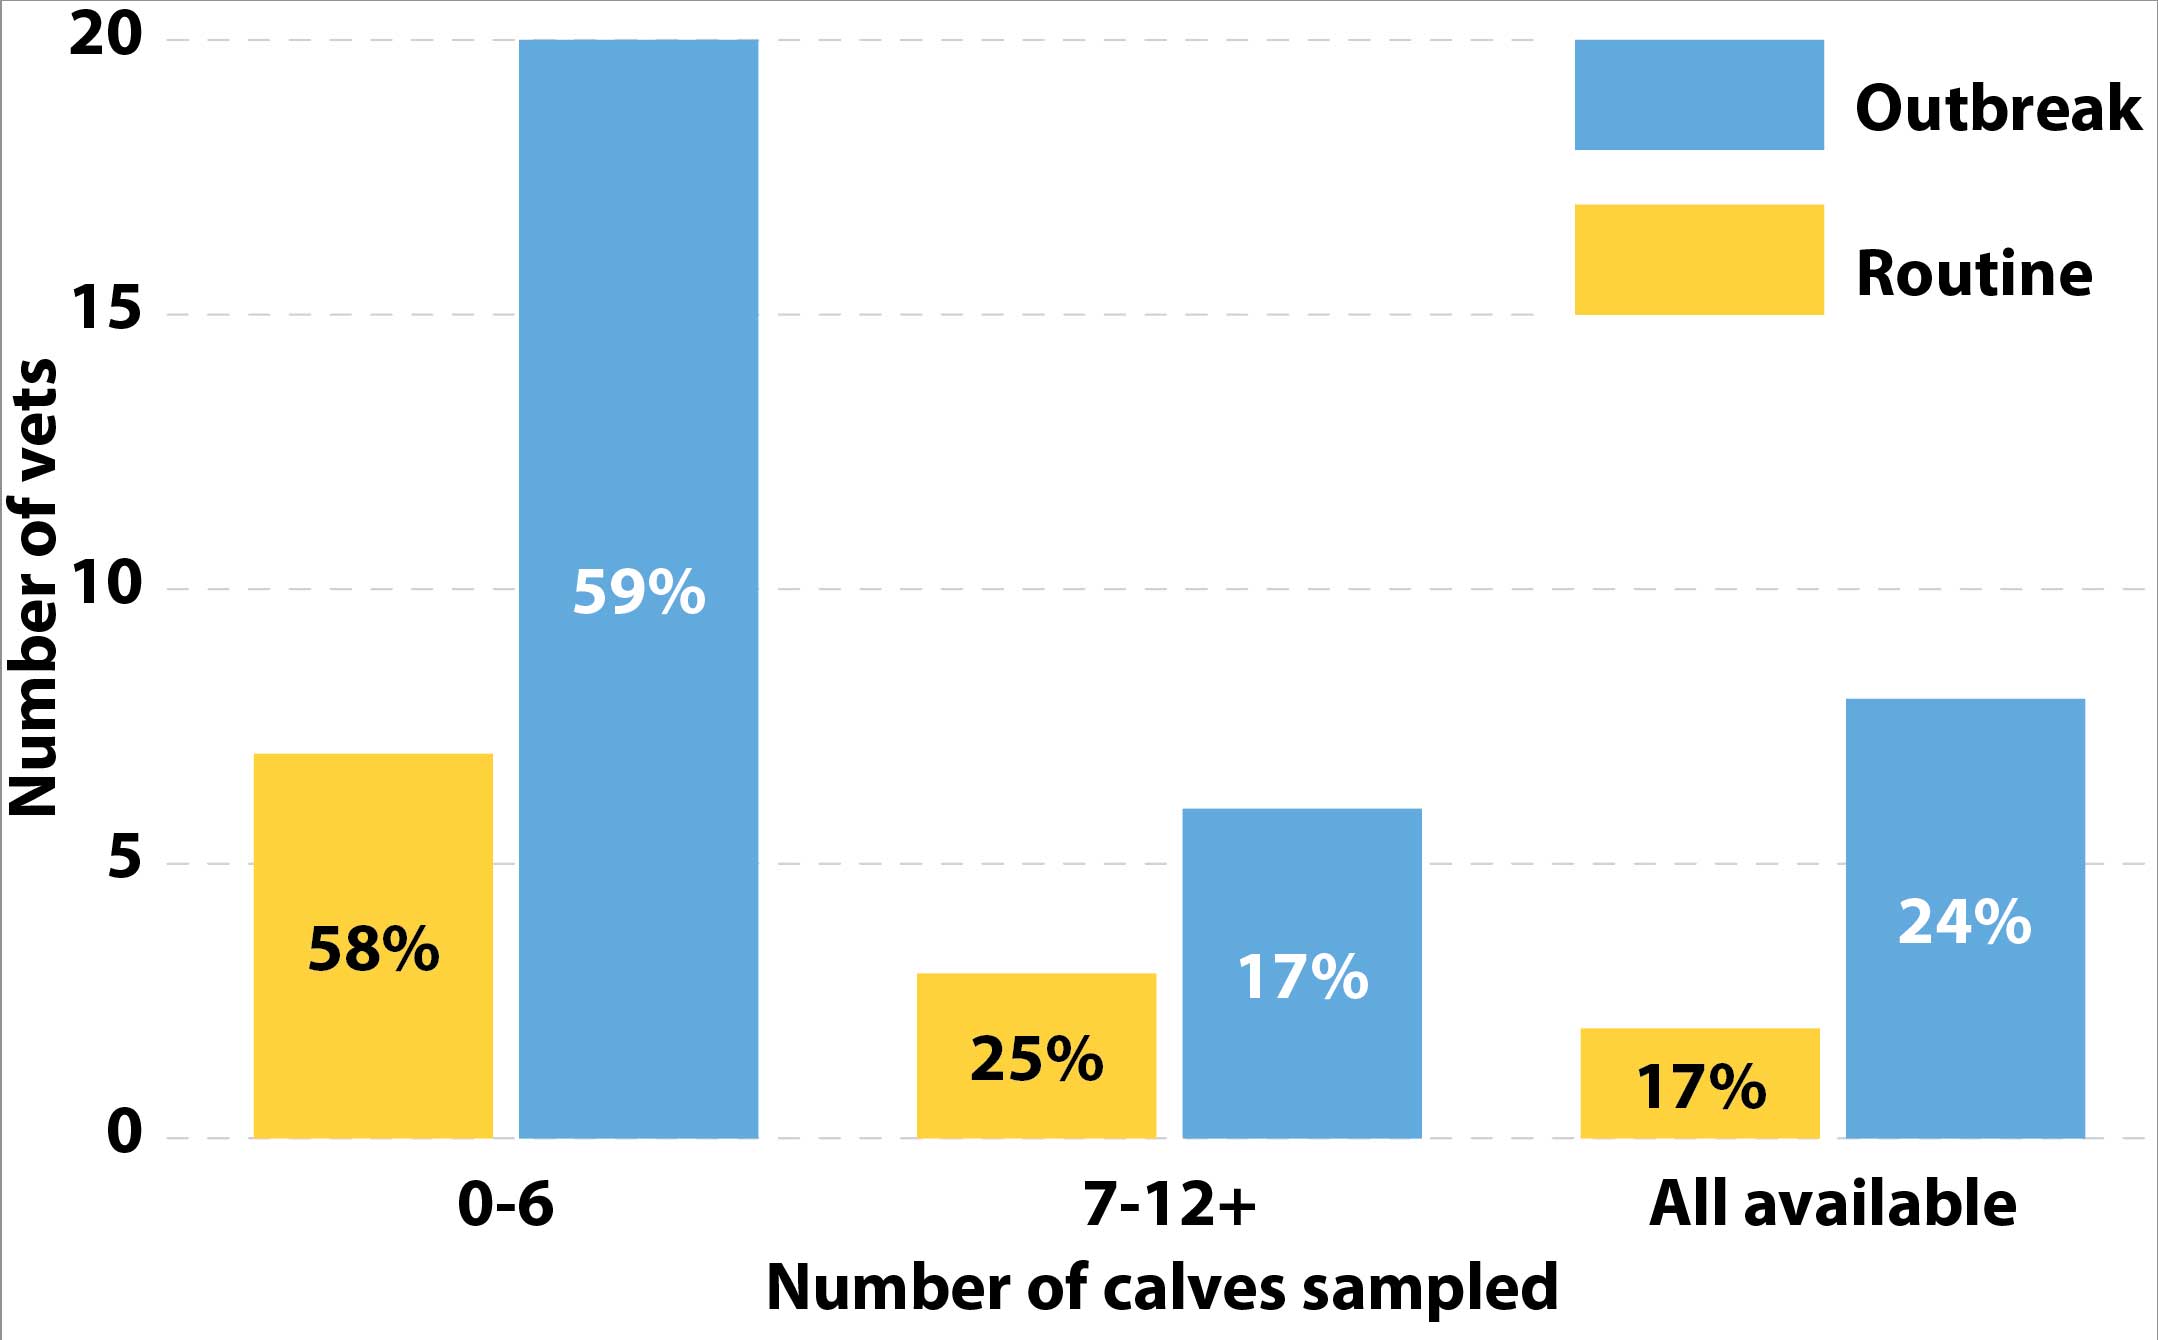 Figure 2. Number of calves routinely sampled for routine failure of passive transfer monitoring or testing in an outbreak situation by 34 Scottish veterinary clinicians.